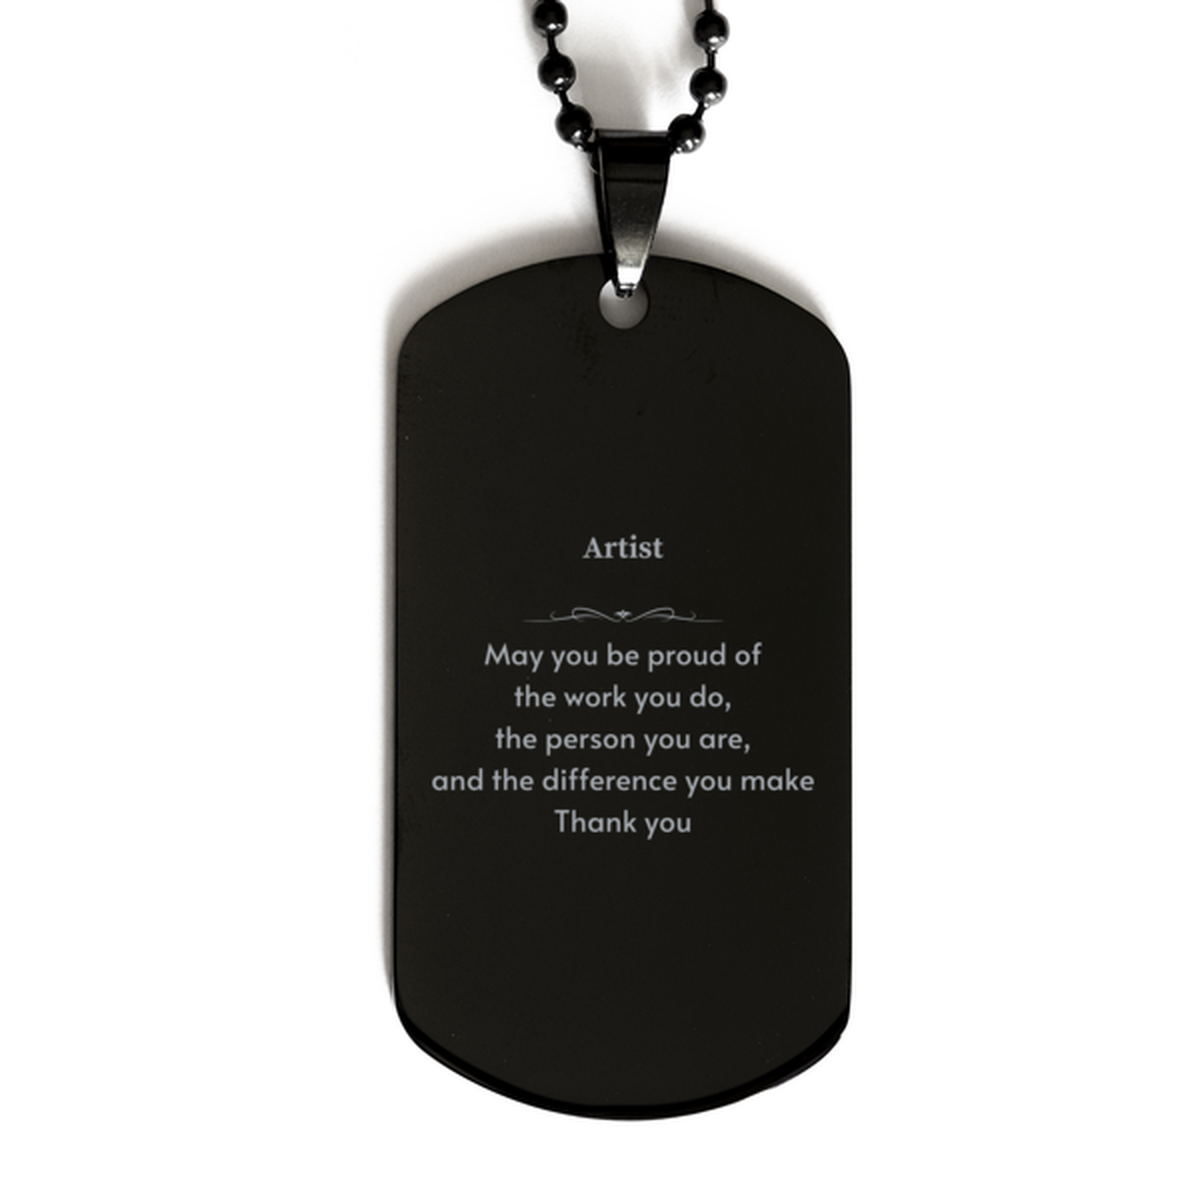 Heartwarming Black Dog Tag Retirement Coworkers Gifts for Artist, Artist May You be proud of the work you do, the person you are Gifts for Boss Men Women Friends